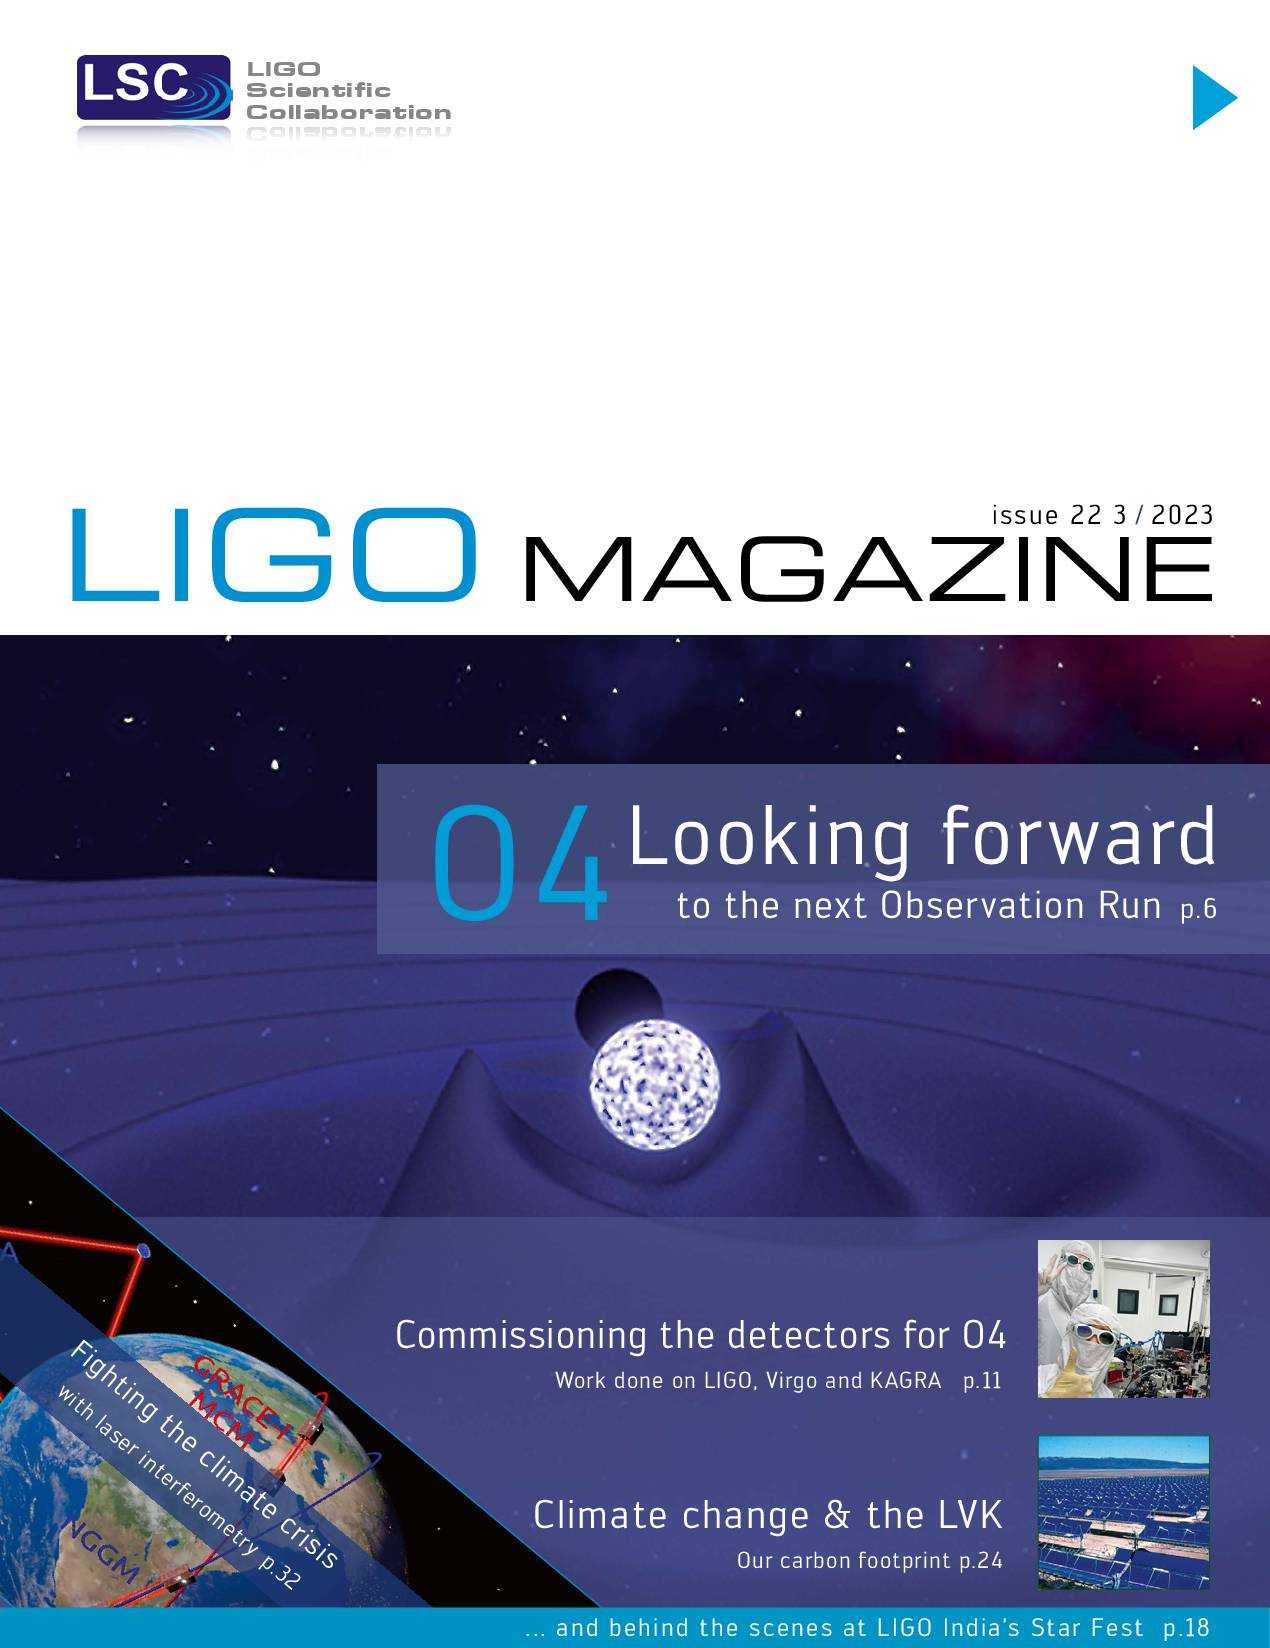 News-Image 19 of: New LIGO Magazine Issue 22 is out